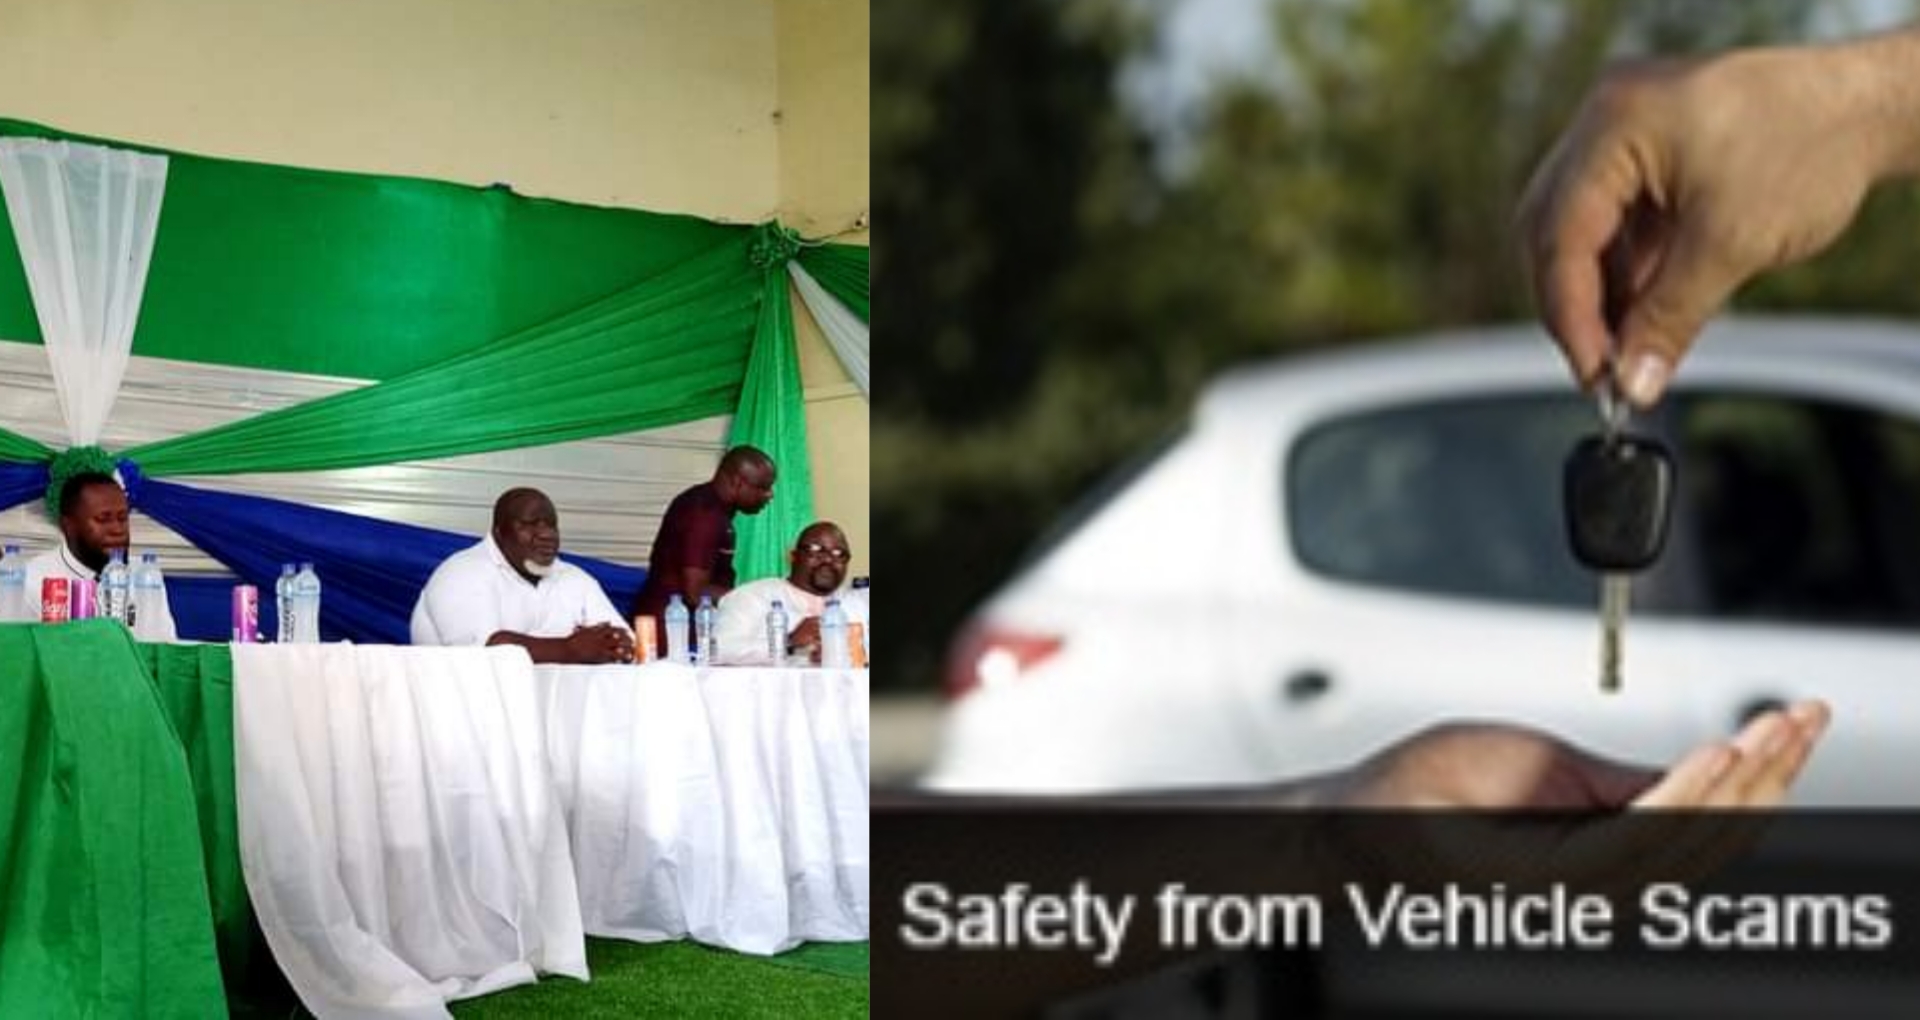 Motor Vehicle Dealers Union Warns Against Fraudsters Posing as Dealers to Con People Out of Cash